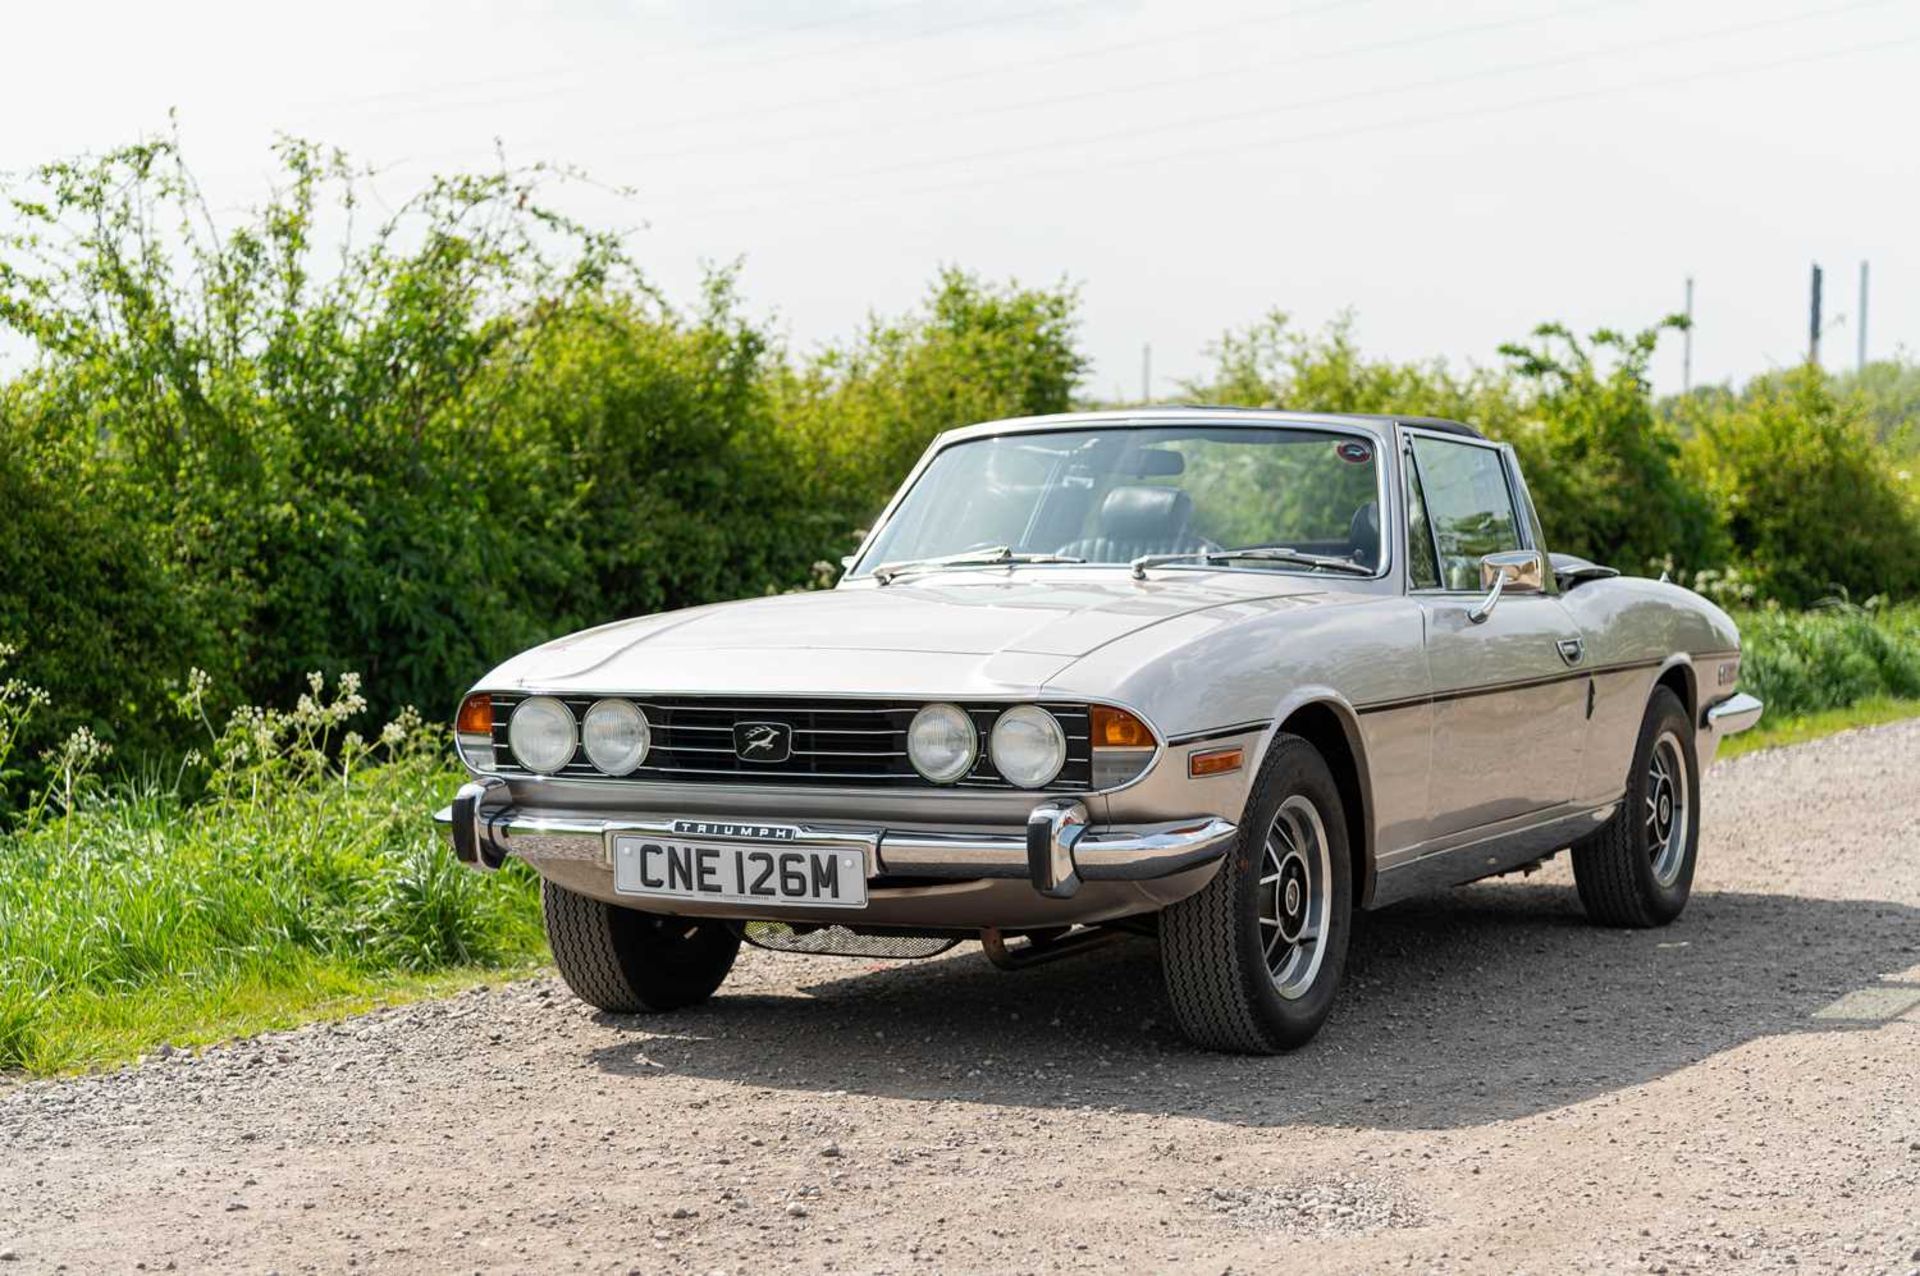 1974 Triumph Stag ***NO RESERVE*** Fully-restored example, equipped with manual overdrive transmissi - Image 11 of 83